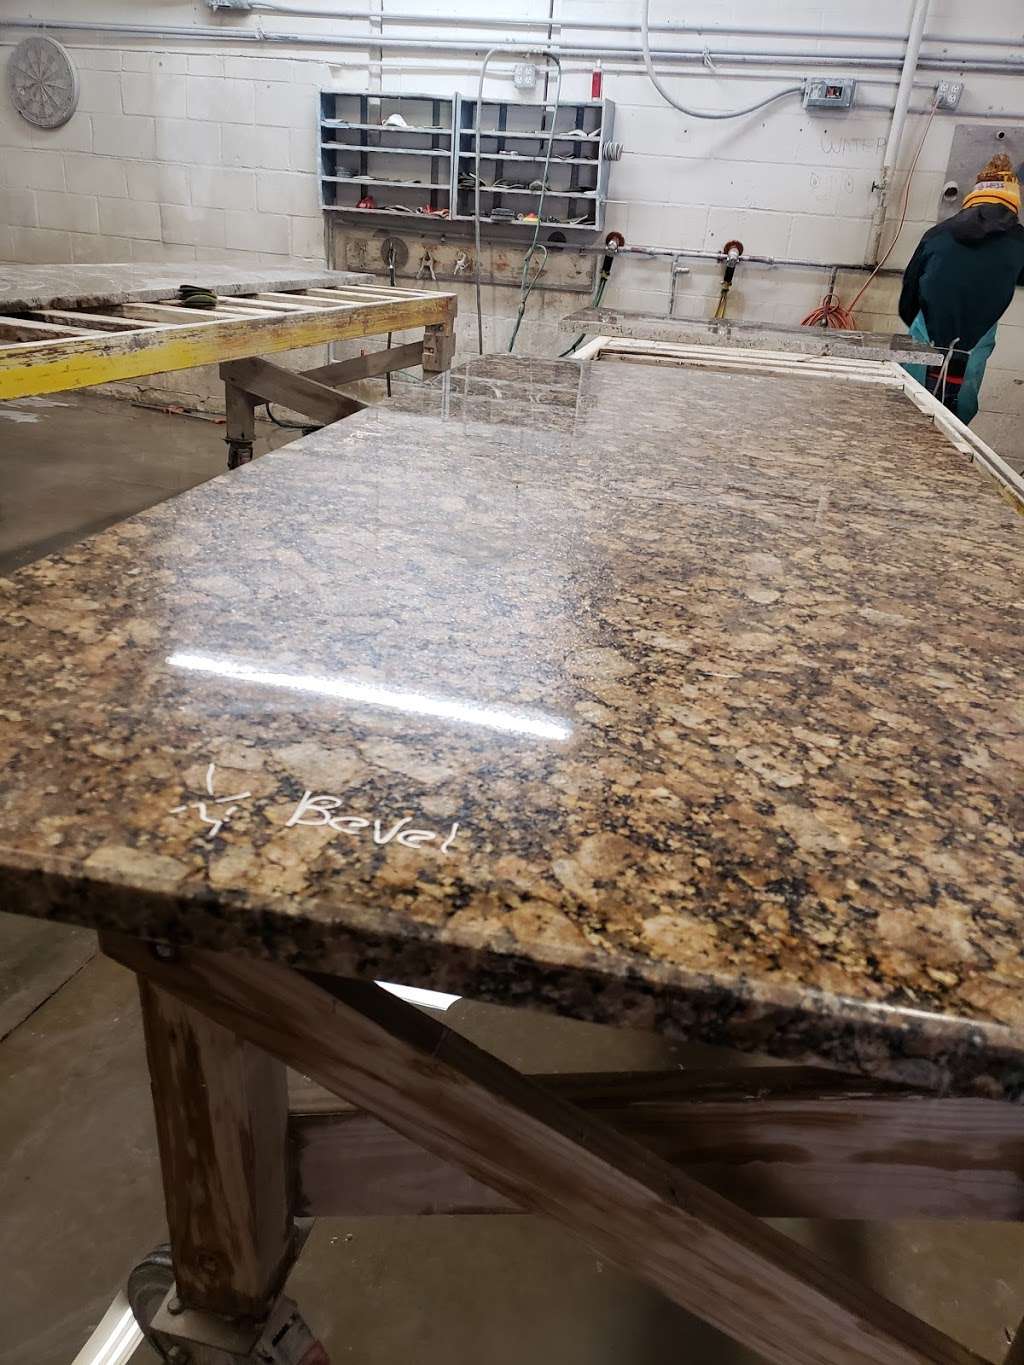 Gold Marble Granite & Cabinets, LLC | 2912 Stafford St, Baltimore, MD 21223 | Phone: (410) 497-8808